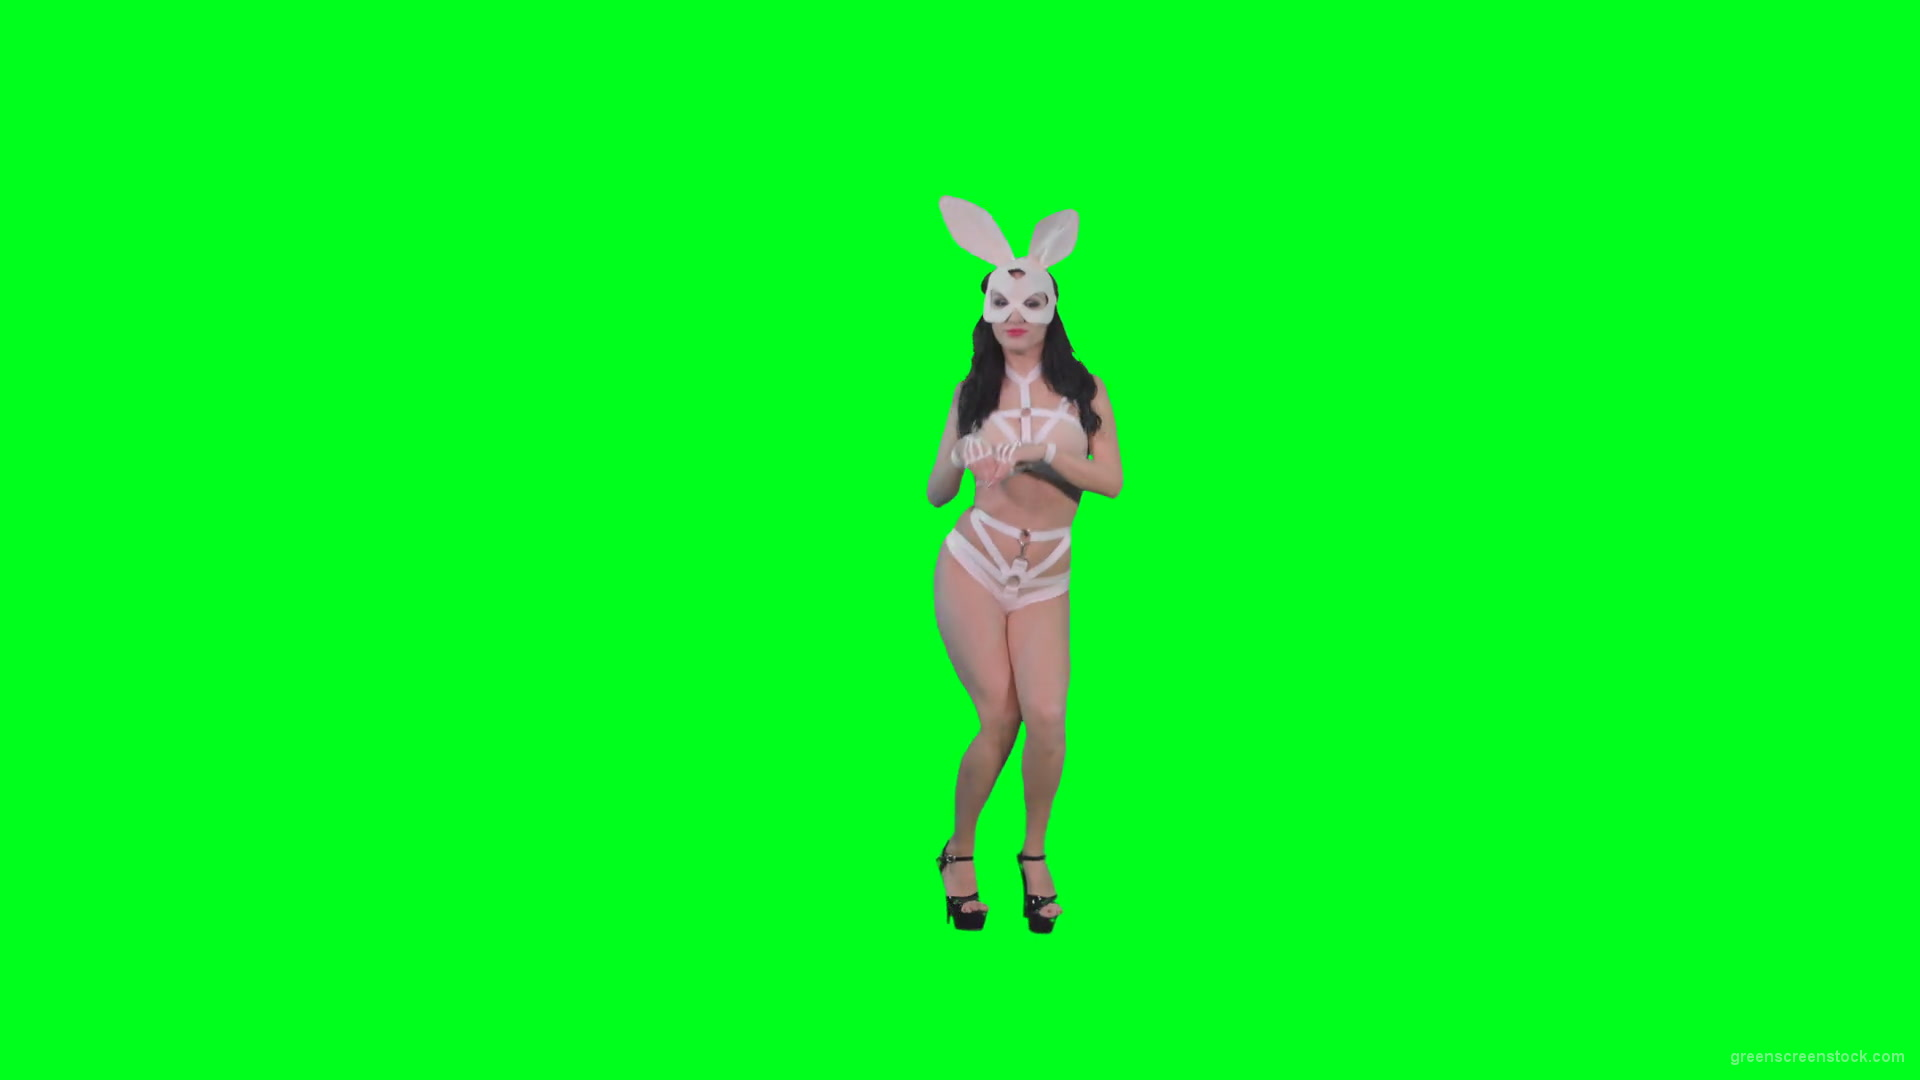 Young-girl-in-rabbit-costume-jumping-and-spinning-on-green-screen-4K-Video-Footage-1920_008 Green Screen Stock